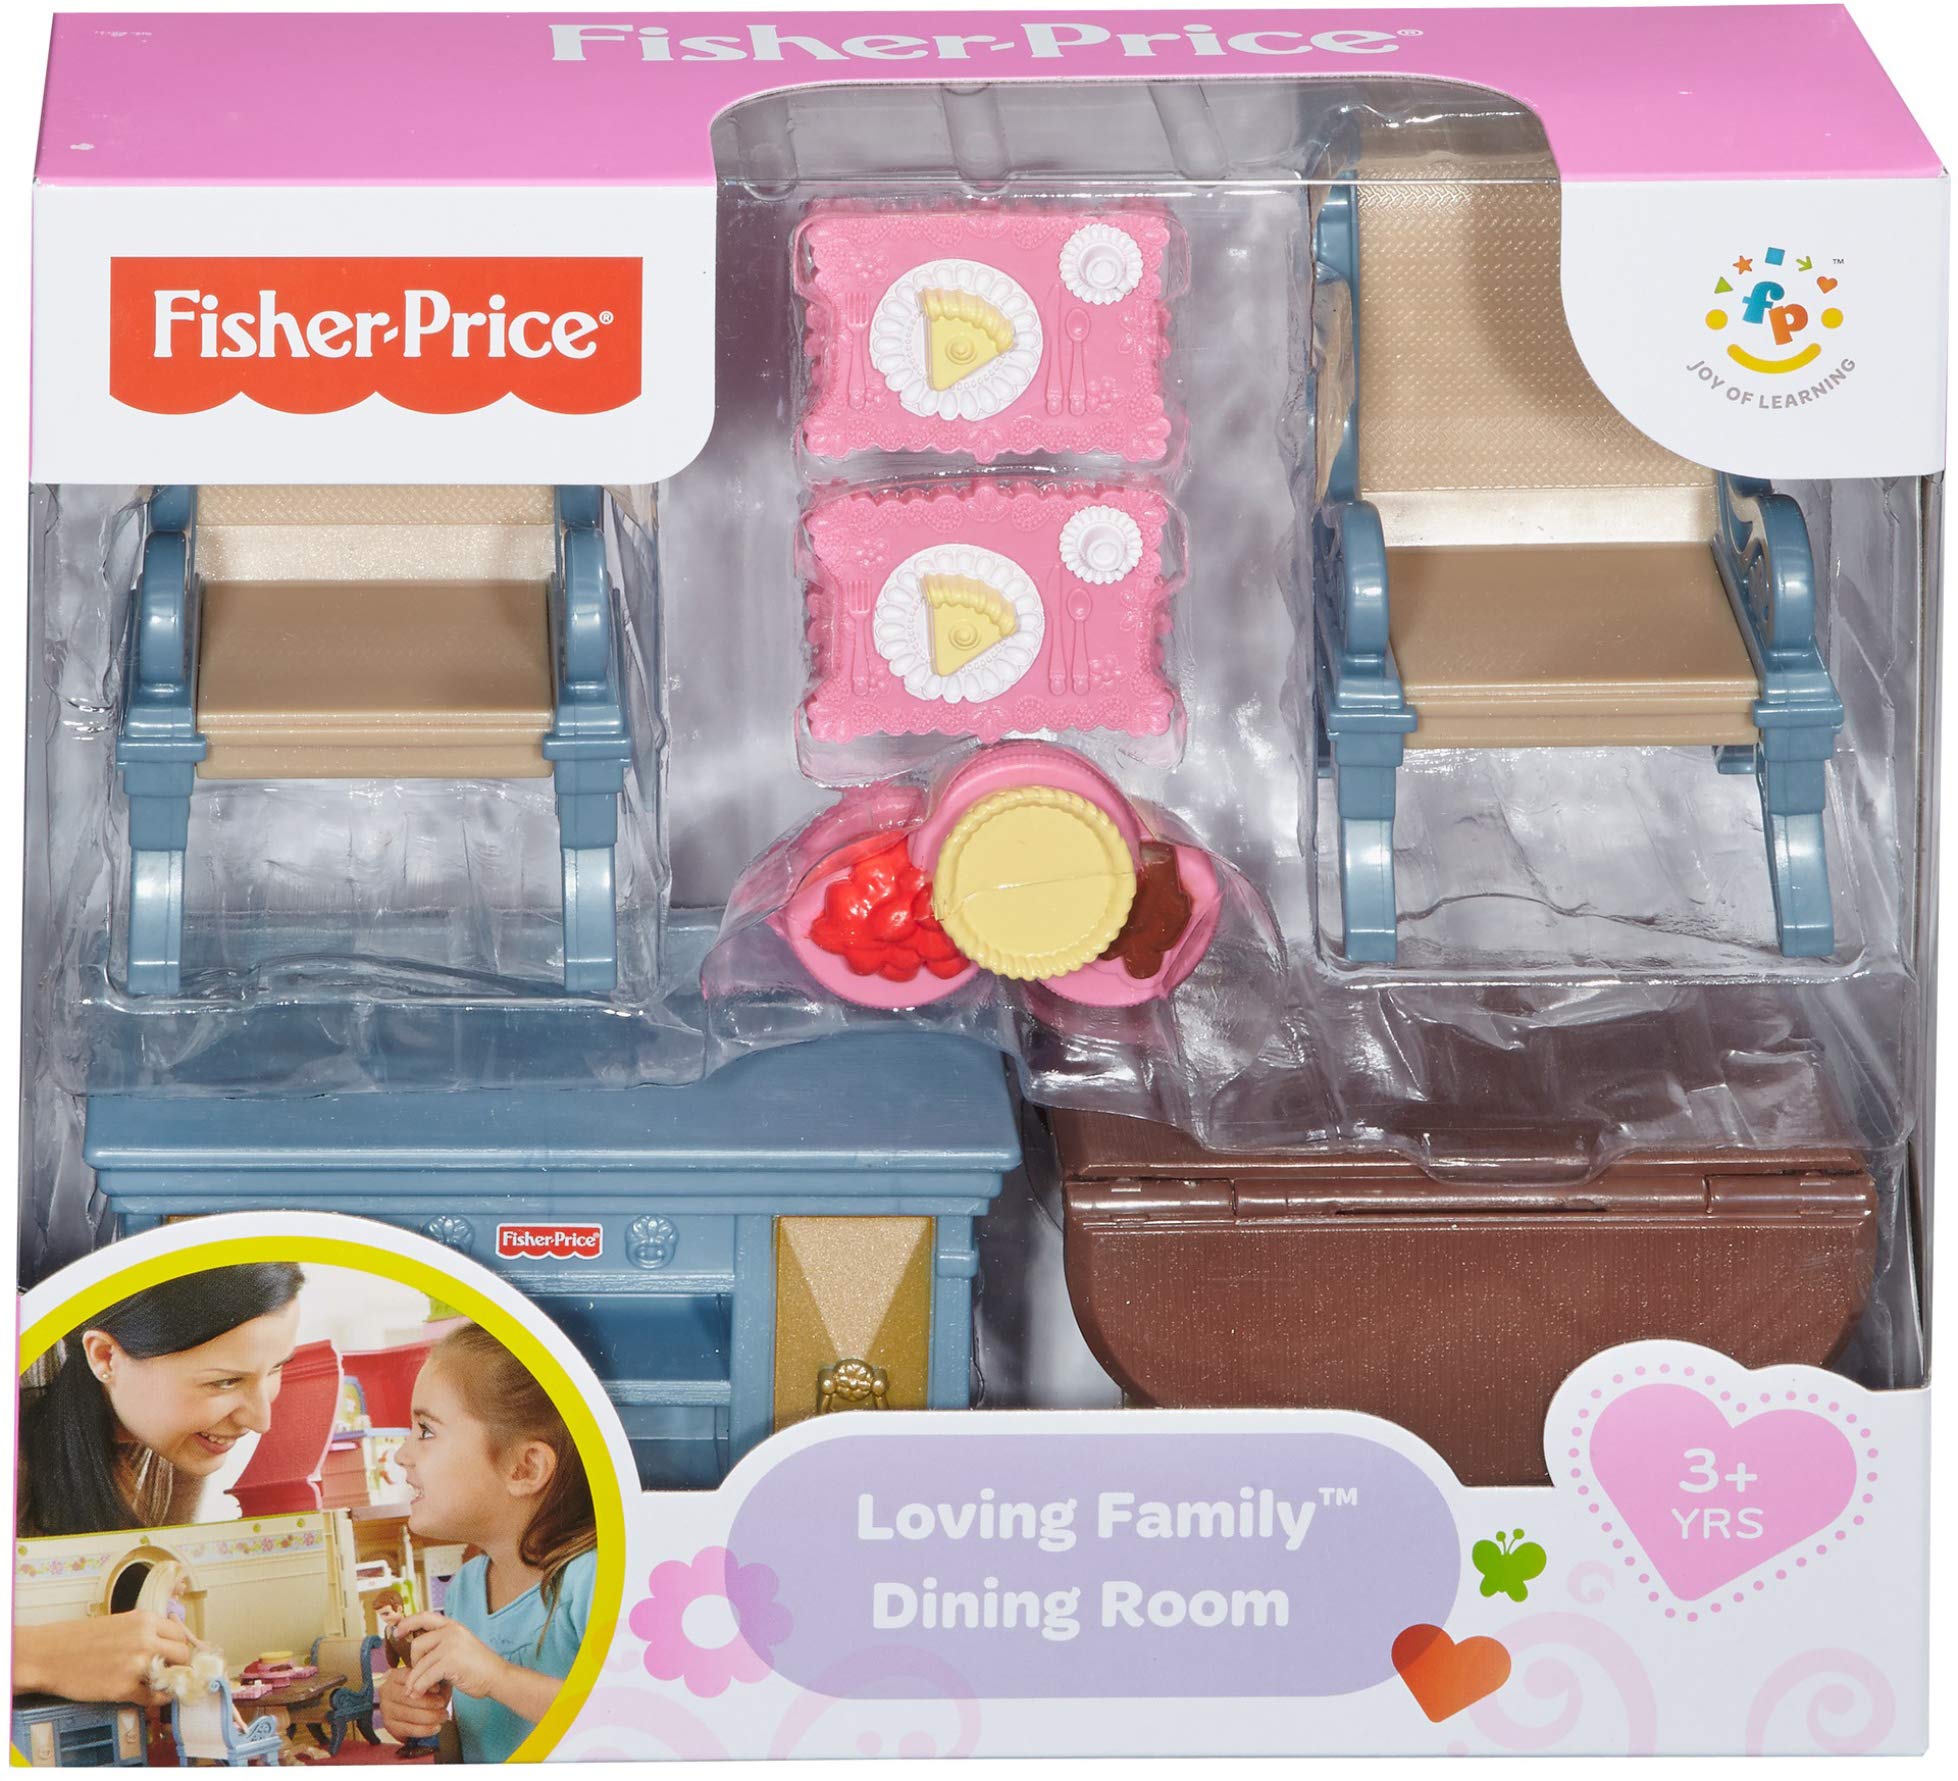 Fisher-Price Loving Family Dining Room